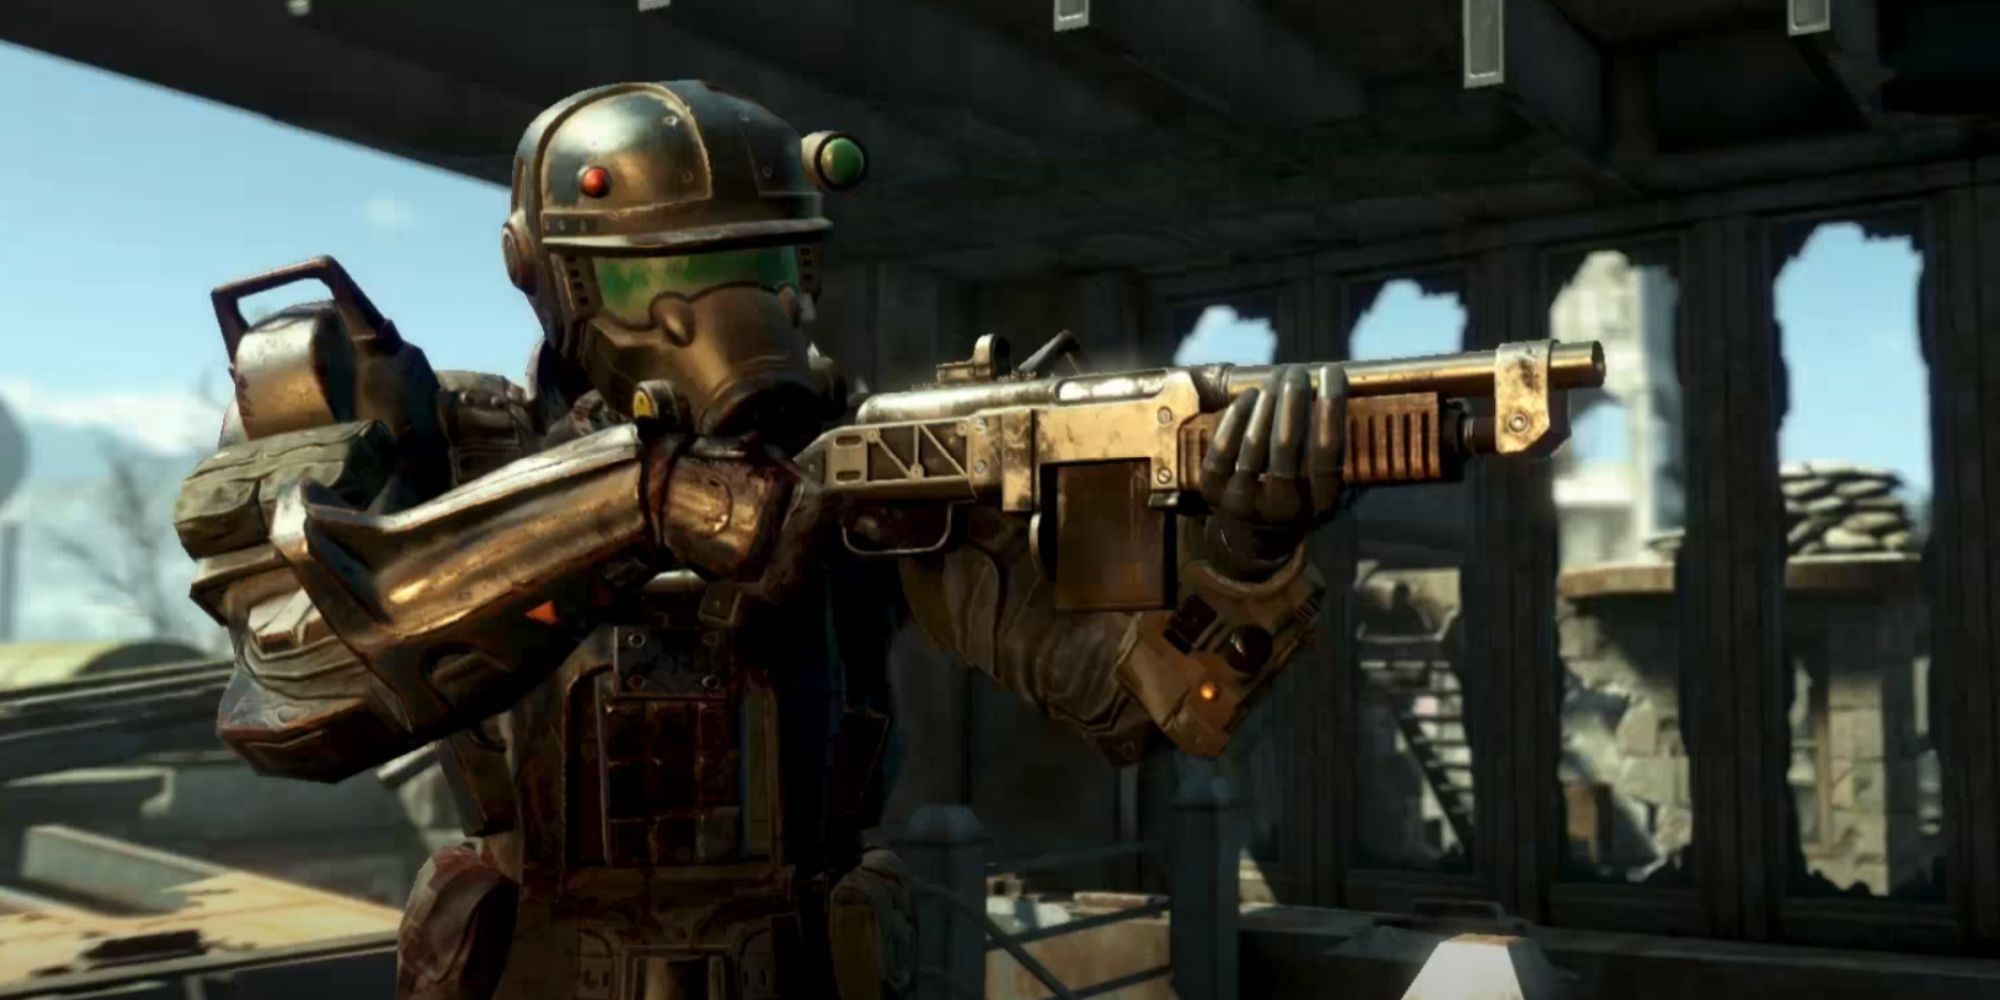 Characters in Fallout 4 Marine Armor